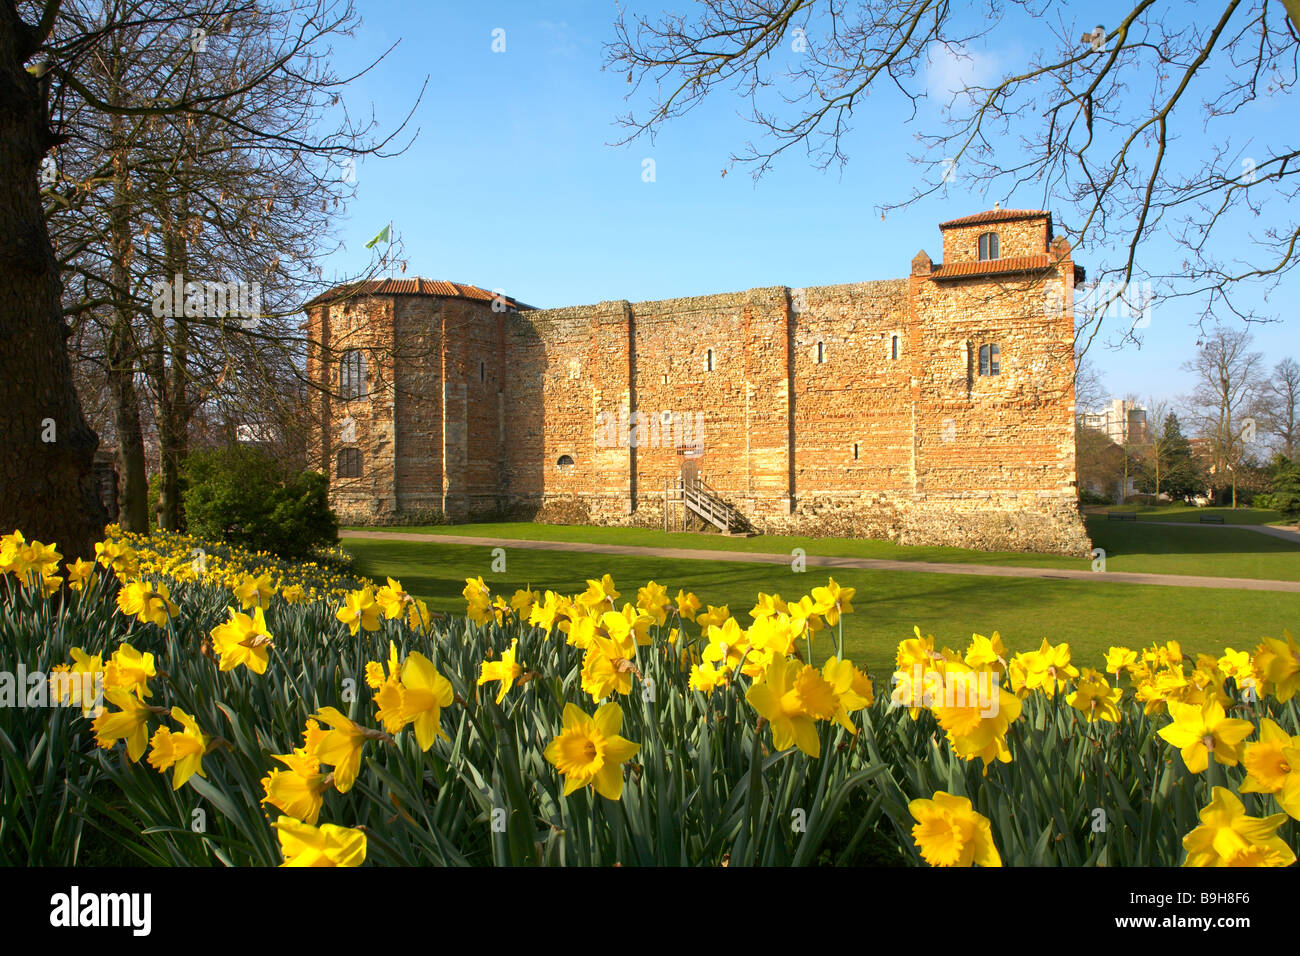 Great Britain England Colchester Essex Castle Museum and Upper Park Spring Daffodils Narcissus Stock Photo